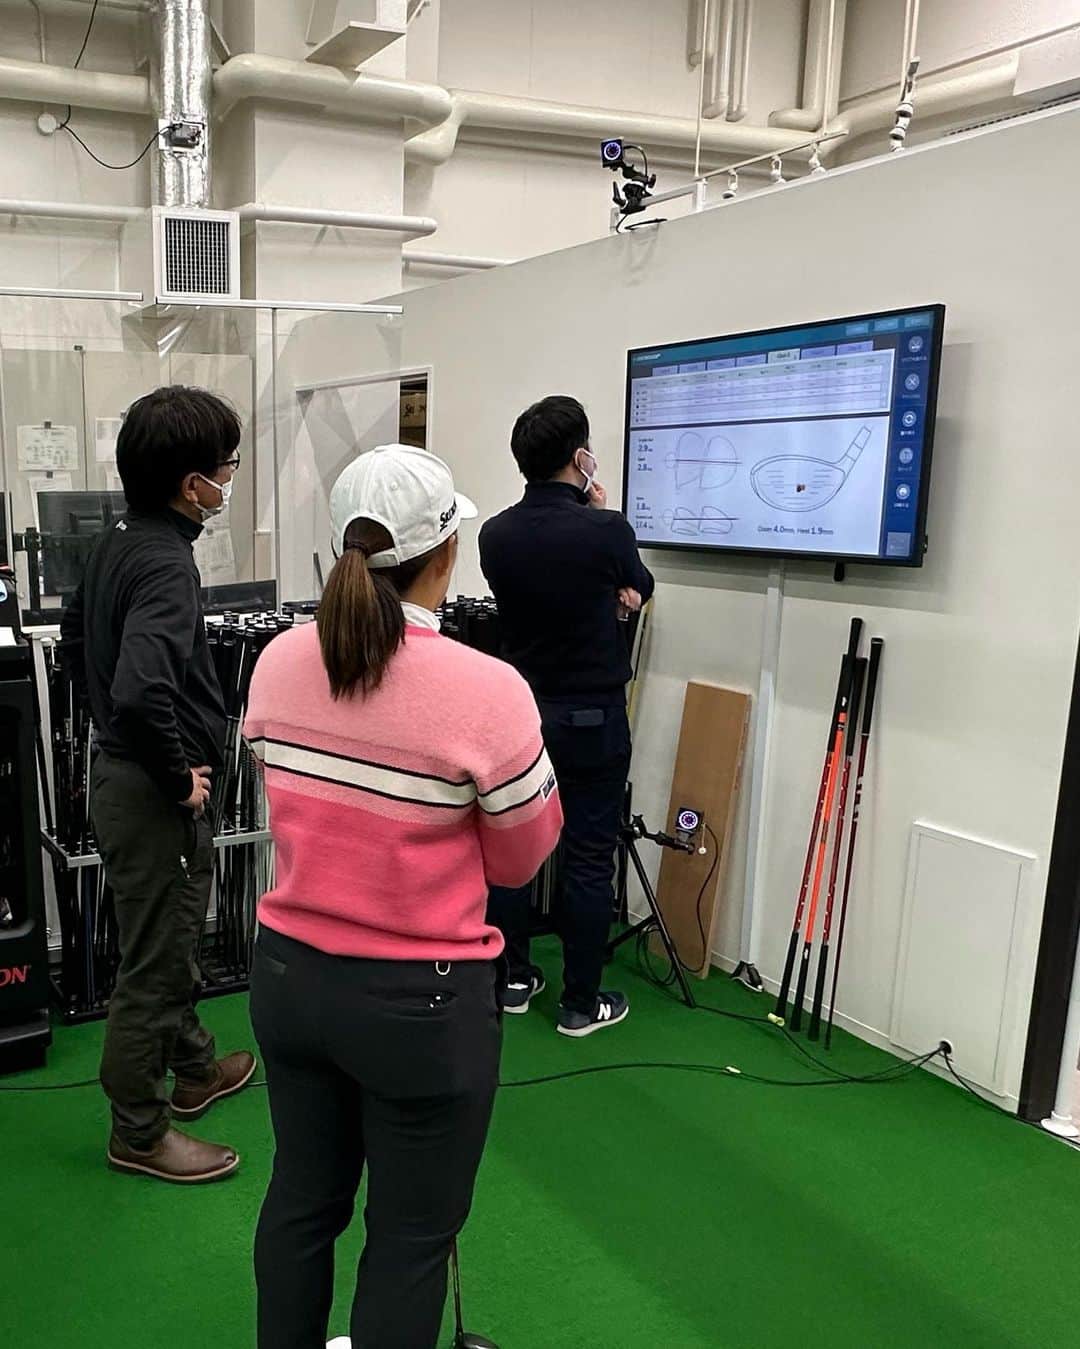 畑岡奈紗さんのインスタグラム写真 - (畑岡奈紗Instagram)「The other day, I visited @dunlopgolf_official headquarters in Kobe! I was able to visit the studio where the clubs are crafted and assembled. I also has an opportunity to talk with the people who designs and tests the clubs! We also did a club fitting🏌️‍♀️ We gave feedback on the ZX7 Mk2, which I have been using since the start of 2023. The fitting was great and shaft adjustment went just what I was expecting! I’ll keep grinding so I can make this new driver as one of my strong game!  The last picture is an Olympic uniform that was displayed in the workshop! The red one is Rikuya Hoshino's uniform, who’s a really good friend of mine! It's really cool to see these uniforms displayed in the workshop!  先日 @dunlopgolf_official 神戸本社にご挨拶に伺いました！ いつもクラブを組み立てて頂いている工房を見学させて頂いたり、クラブの設計やテストをしてくださる方々とも直接お話させて頂きとても勉強になりました！ クラブテストもさせて頂きました🏌️‍♀️ 開幕戦から使わせて頂いているZX7 Mk2のフィードバックをさせて頂きシャフトの調整をして頂きました！ 次戦に向けてもっと自分の武器に出来るように調整を続けています！  最後の1枚はオリンピックのユニフォームを以前送られて頂いたのですが、工房に飾って頂いていたので、記念撮影しました！ 赤い方のウェアは同じ茨城出身の星野陸也プロのウェアです！」2月10日 10時15分 - nasahataoka